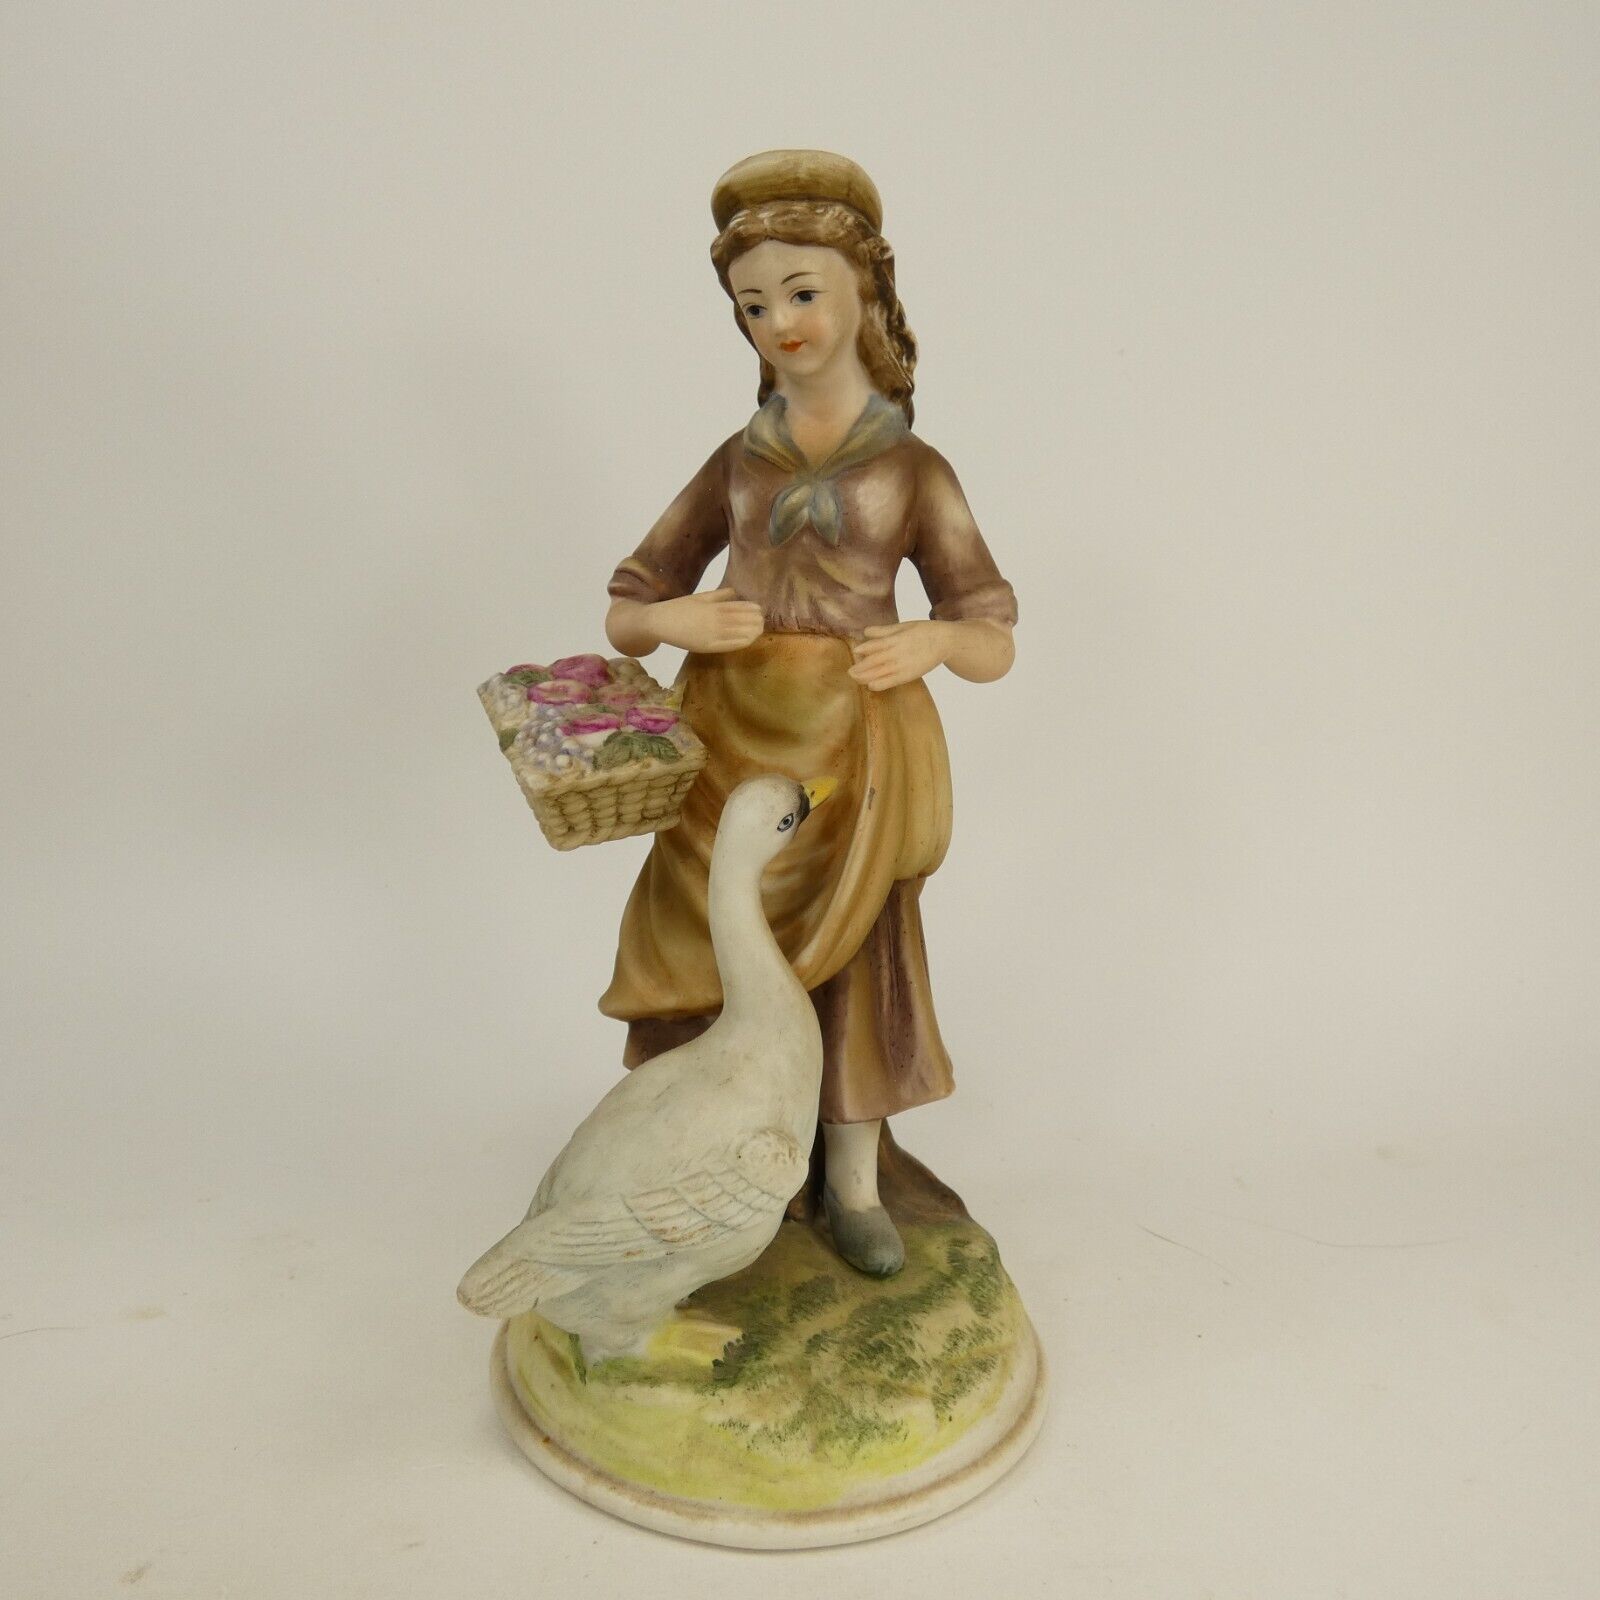 Primary image for Andrea  " Girl With Basket And Goose "  Figurine  Nice Display Piece 6425 SFJH2